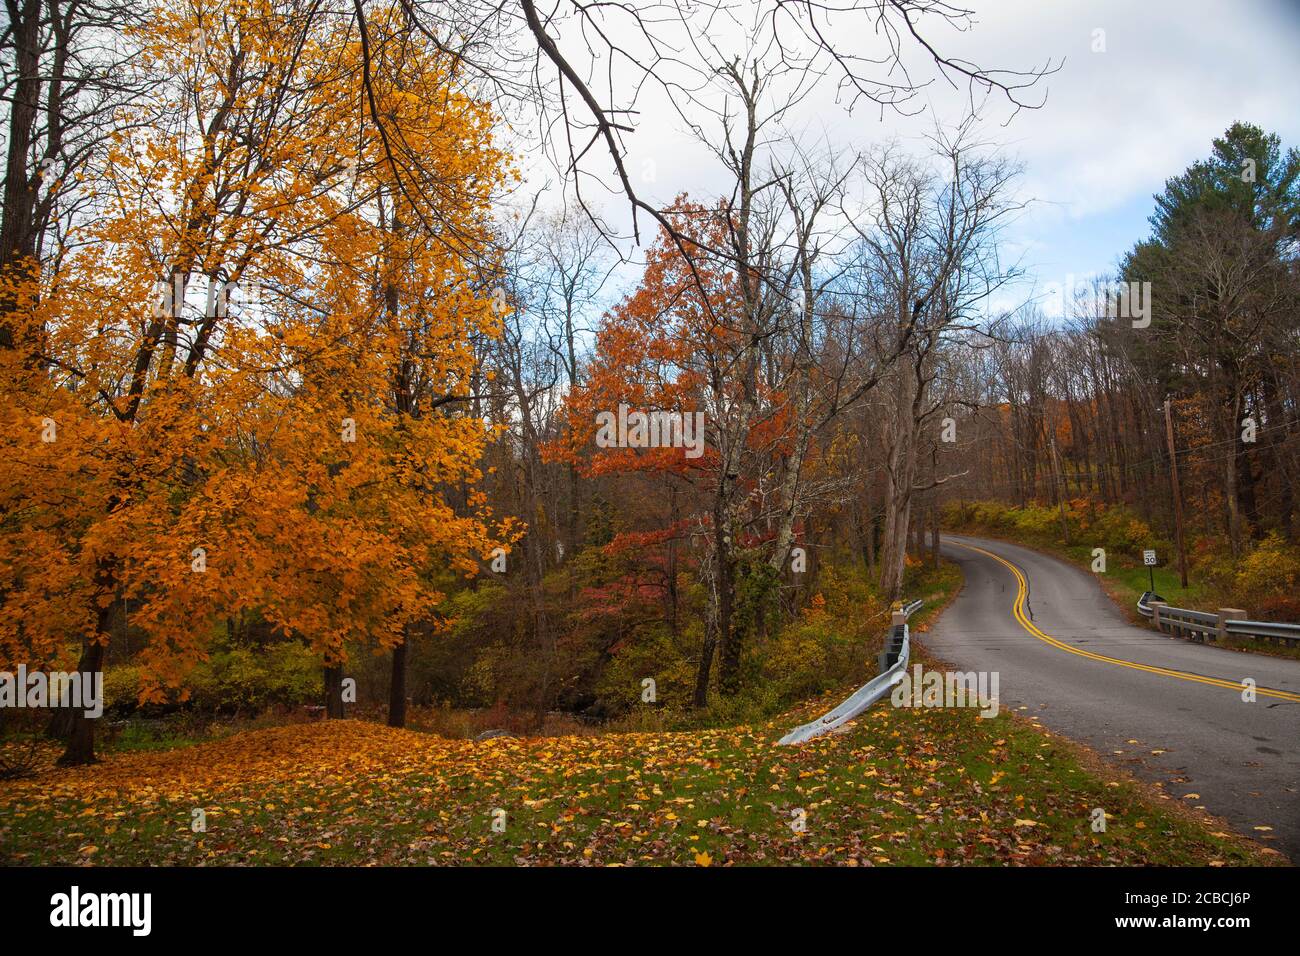 Fall trees, road and yellow leaves on the ground in Litchfield county Connecticut, USA Stock Photo